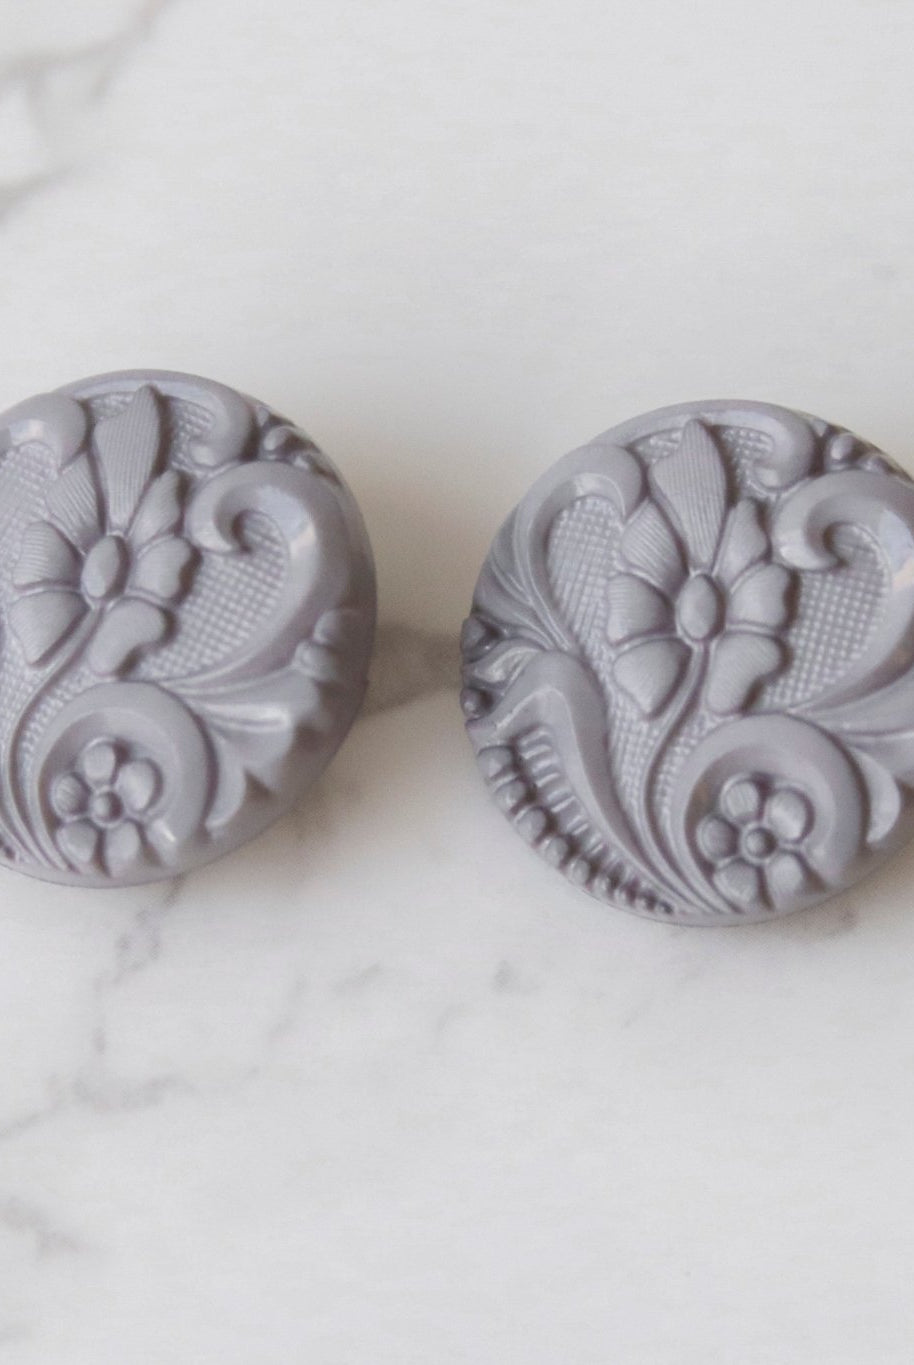 Gray, Art Nouveau Florals, Shank Buttons. Available in 15mm, 18mm, 20mm, 25.5mm - Boho Fabrics